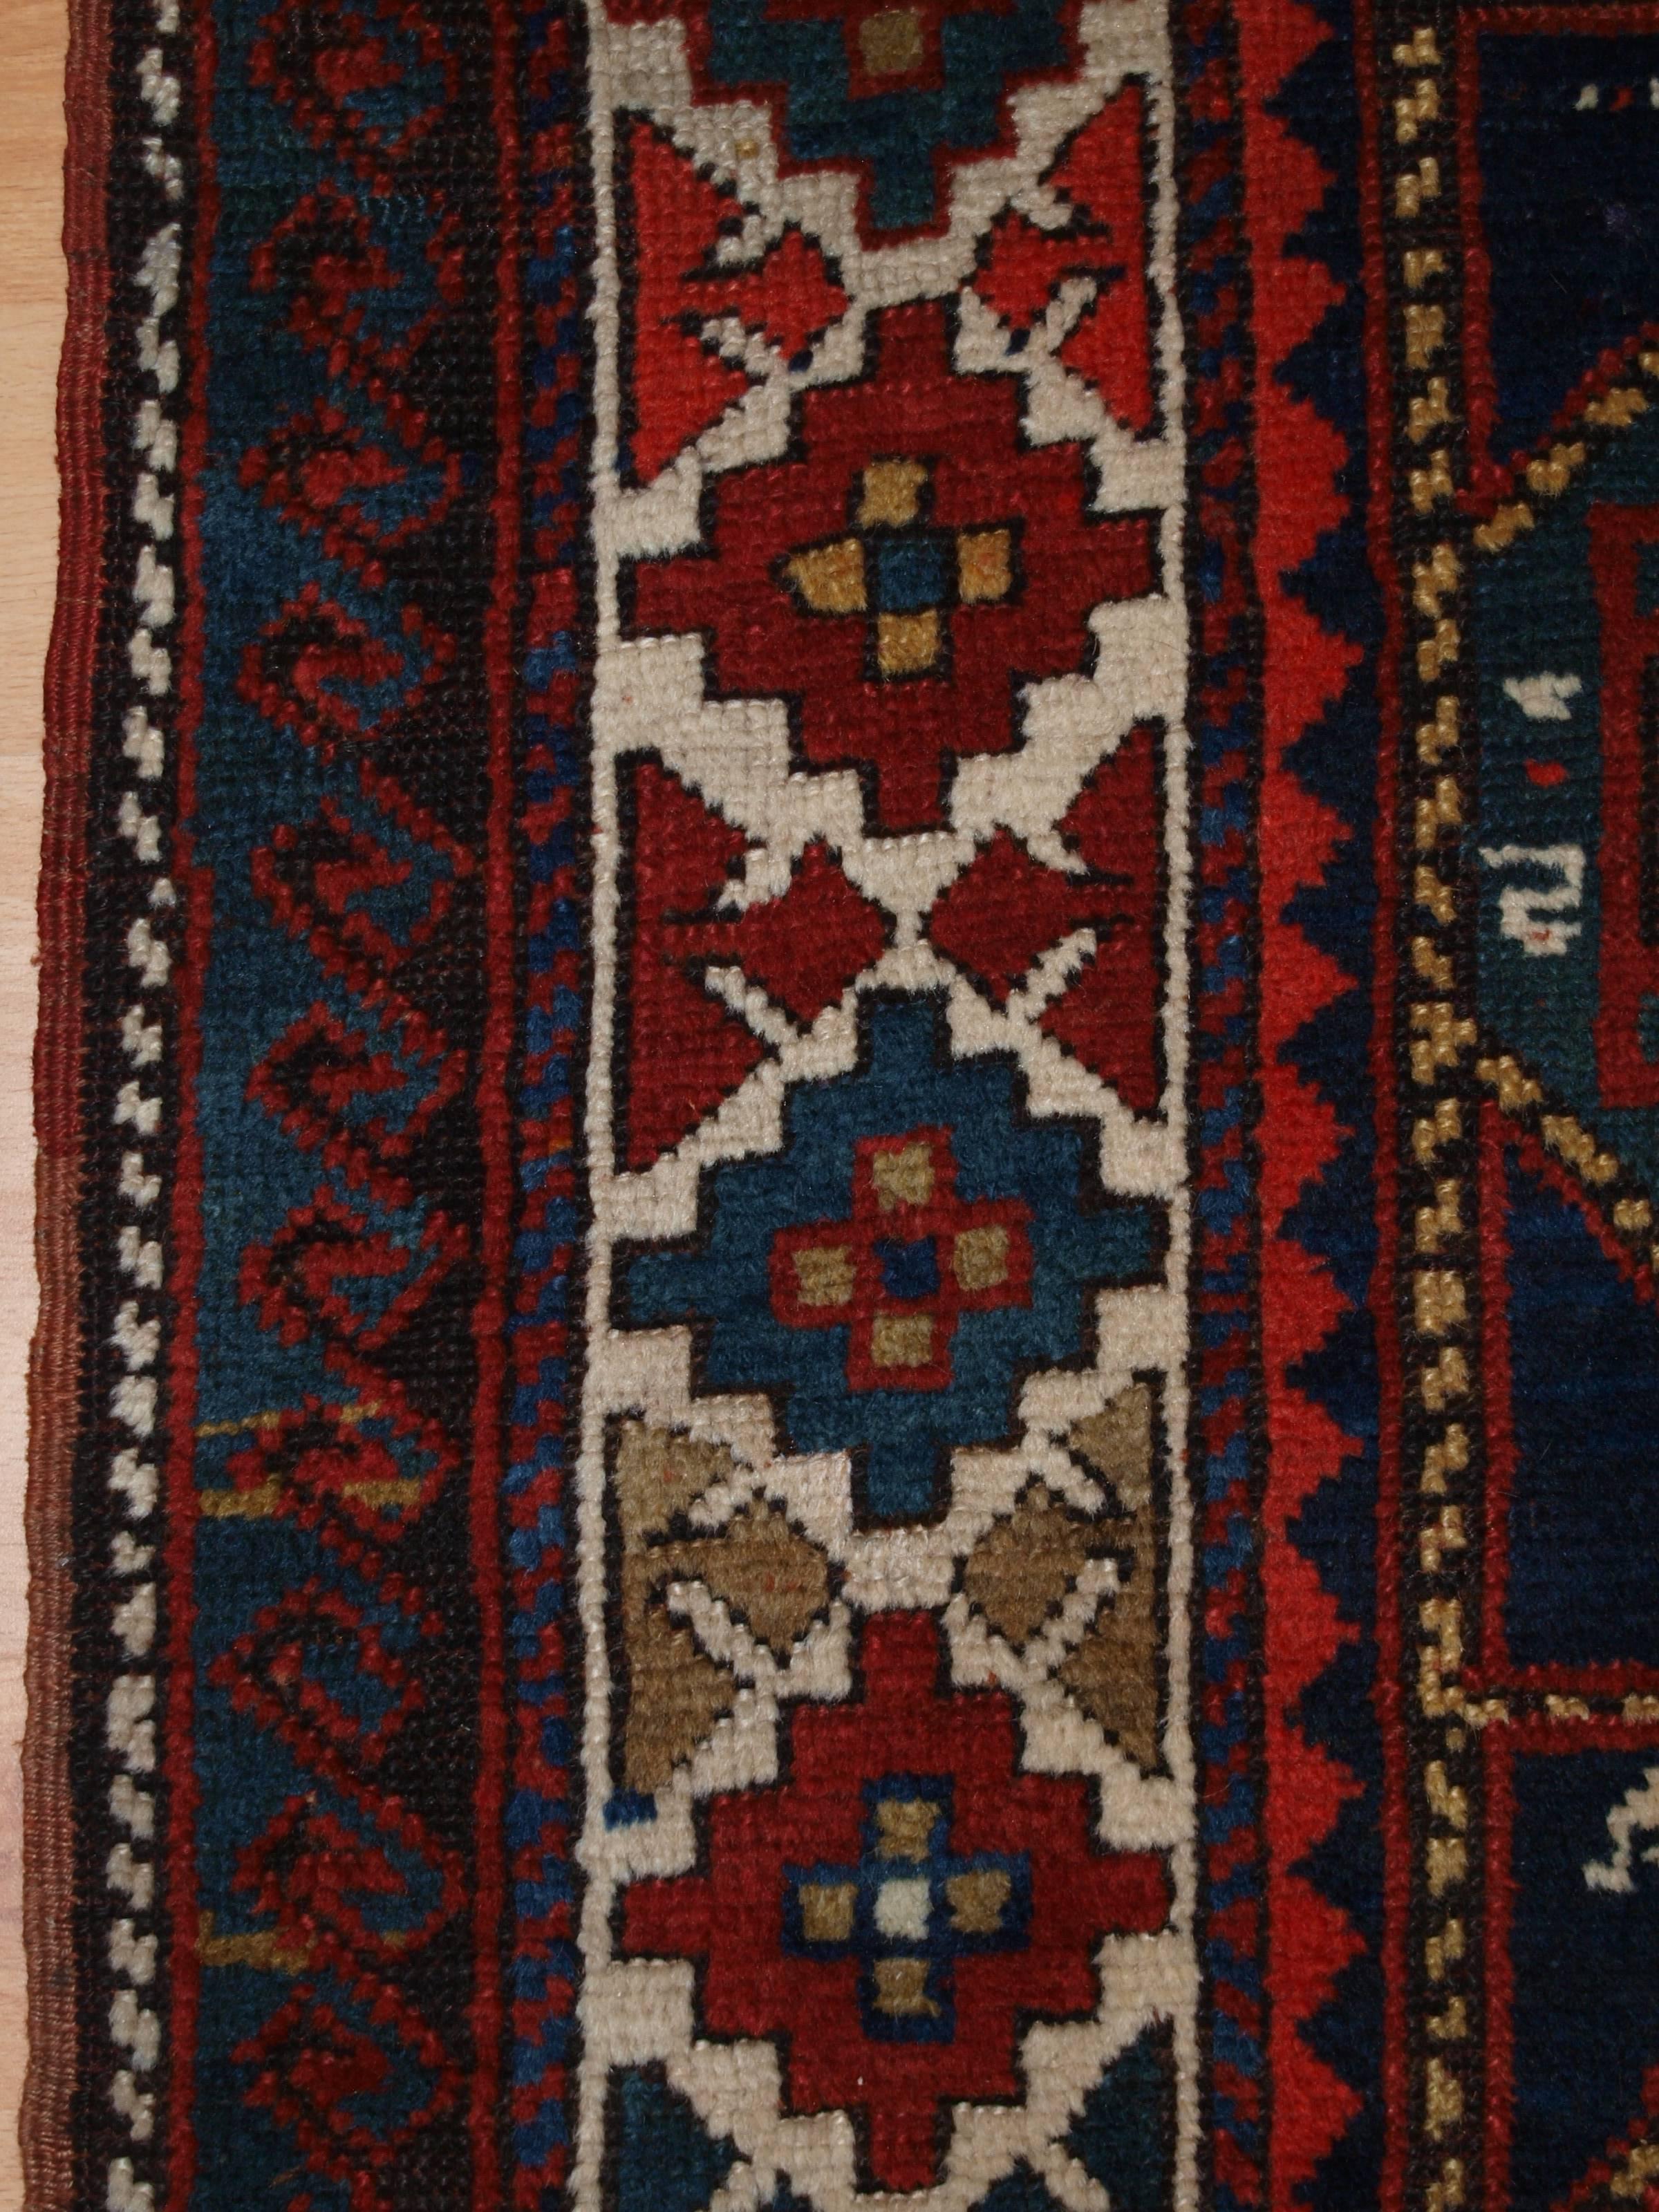 Antique Caucasian Kazak Long Rug or Short Runner from the Western Caucasus In Excellent Condition For Sale In Moreton-in-Marsh, GB